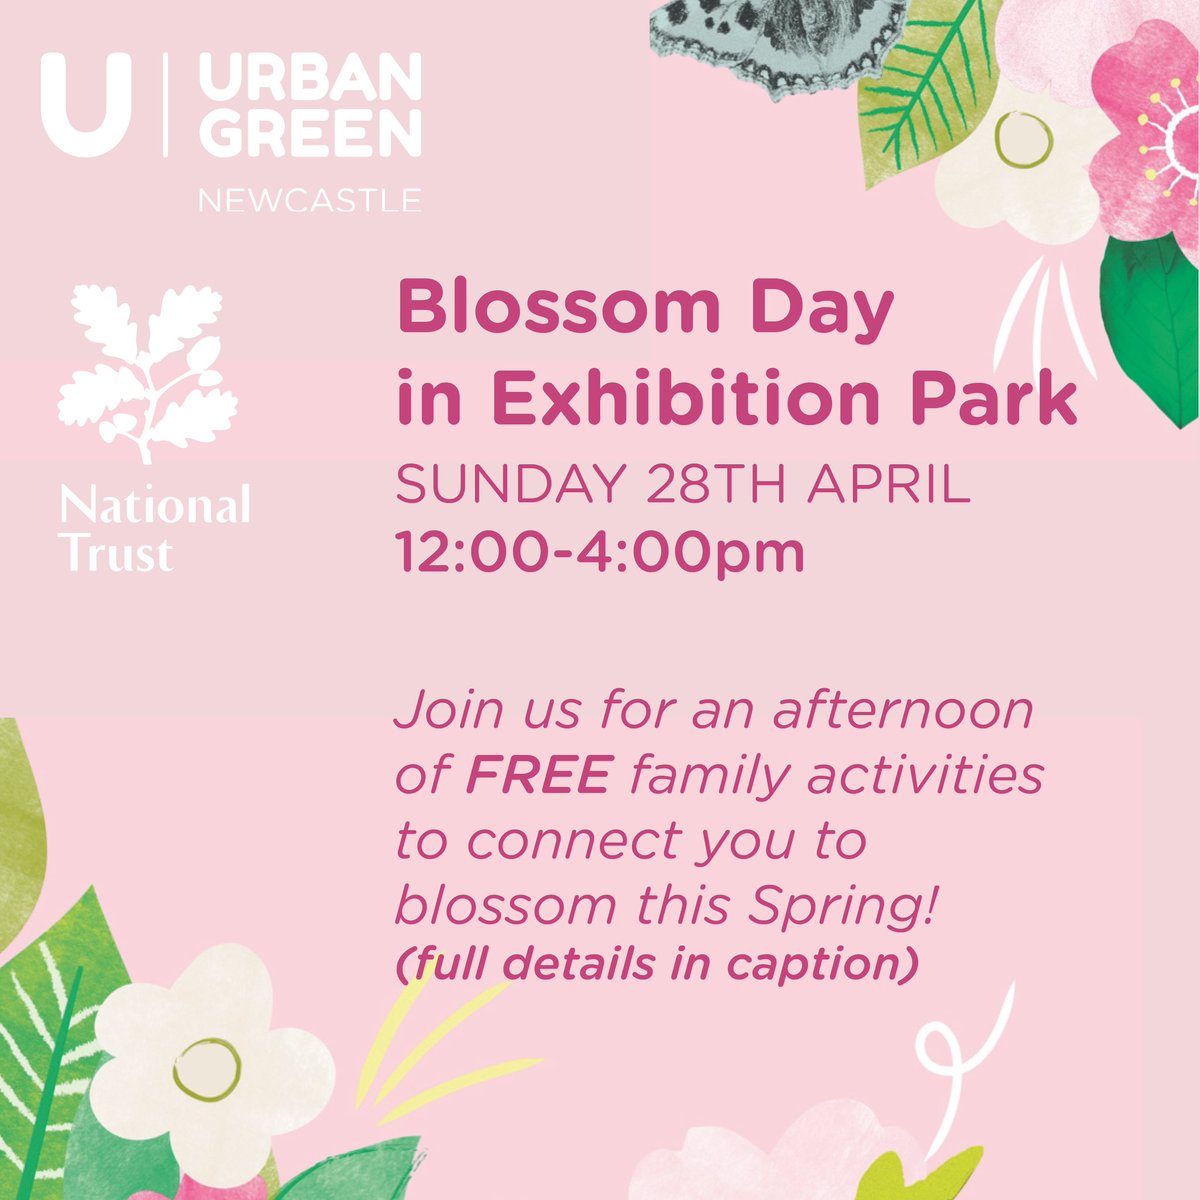 In support of @nationaltrust ‘s Blossom Project, we’re holding a FREE family activity day in Exhibition Park this Sunday 28th April! Find out more here: urbangreennewcastle.org/event/blossom-…